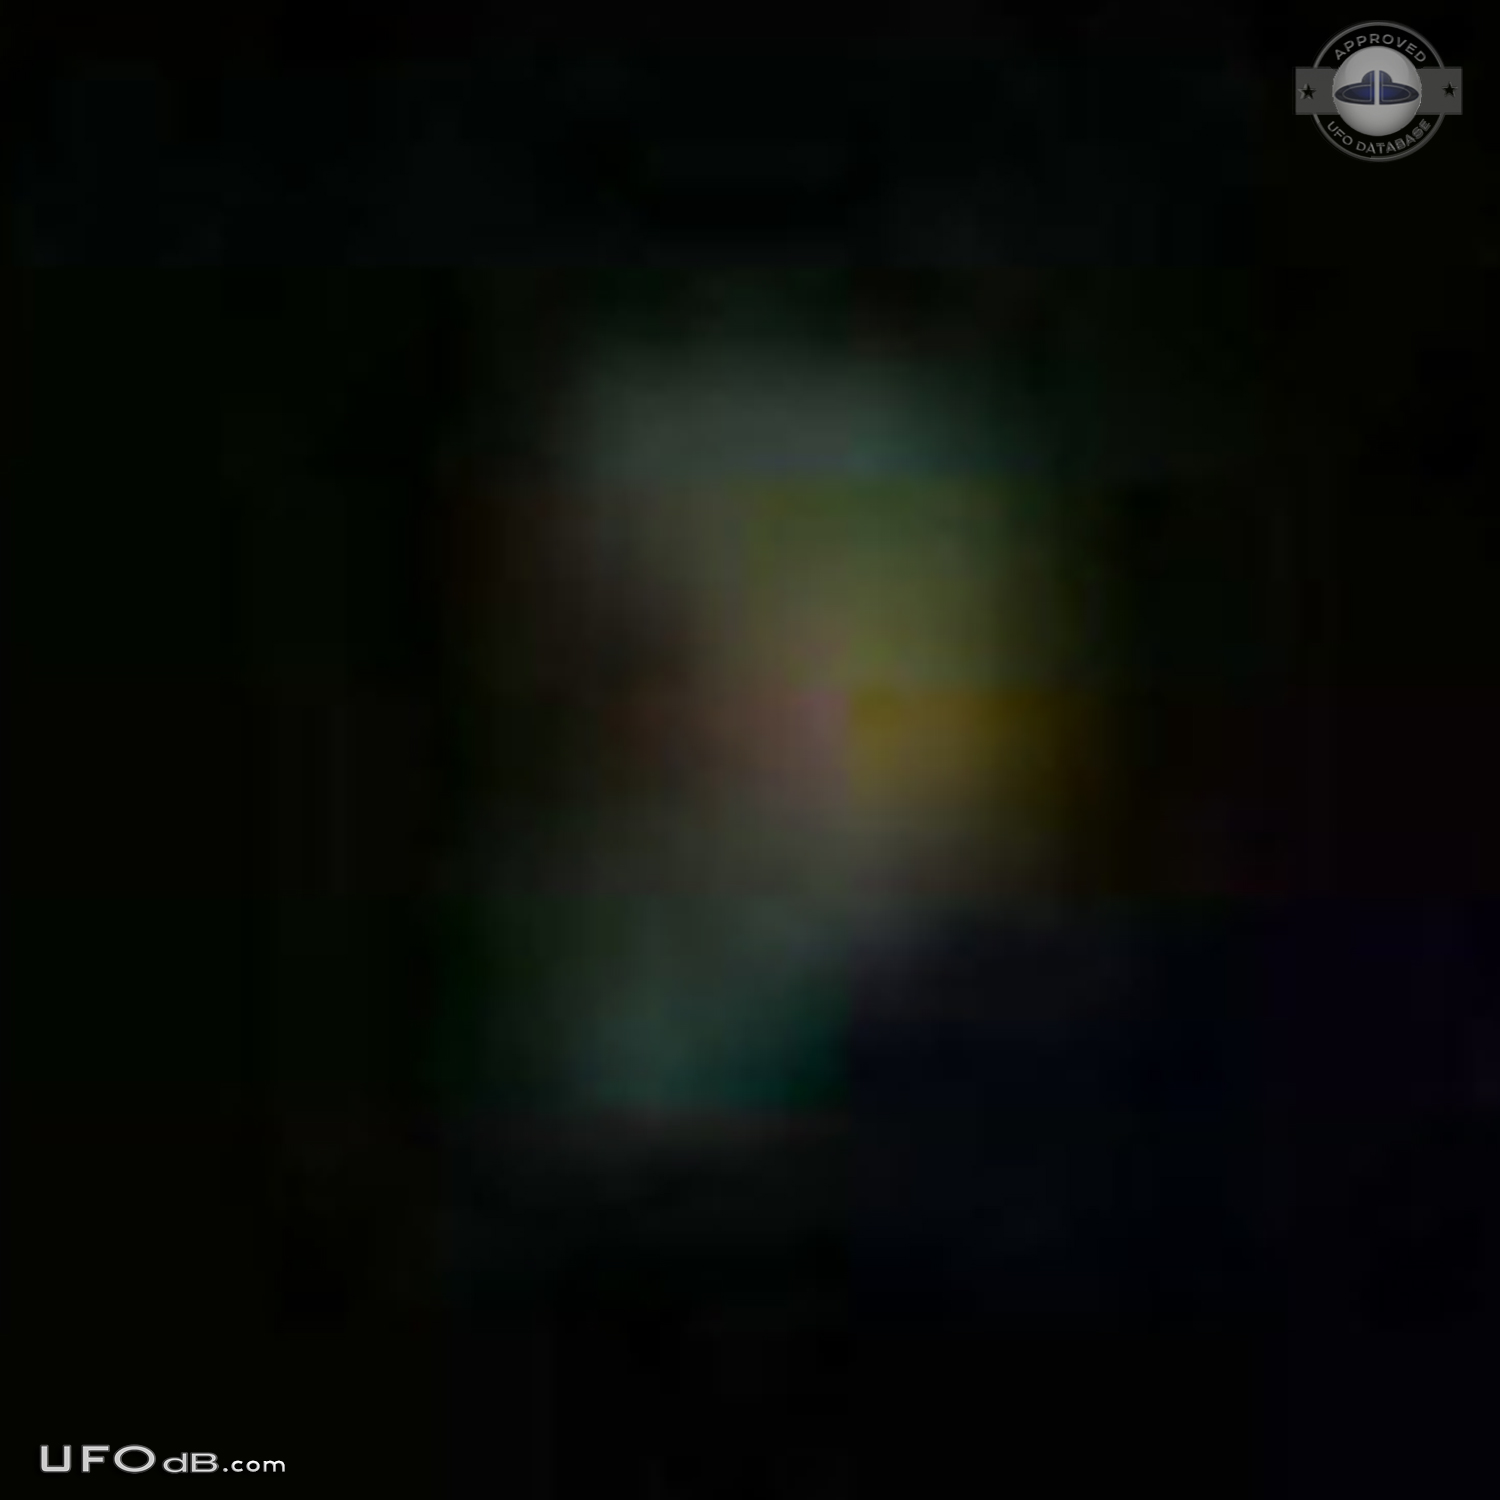 Incredible UFO sighting with pictures & details - Troyan Bulgaria 2010 UFO Picture #464-9